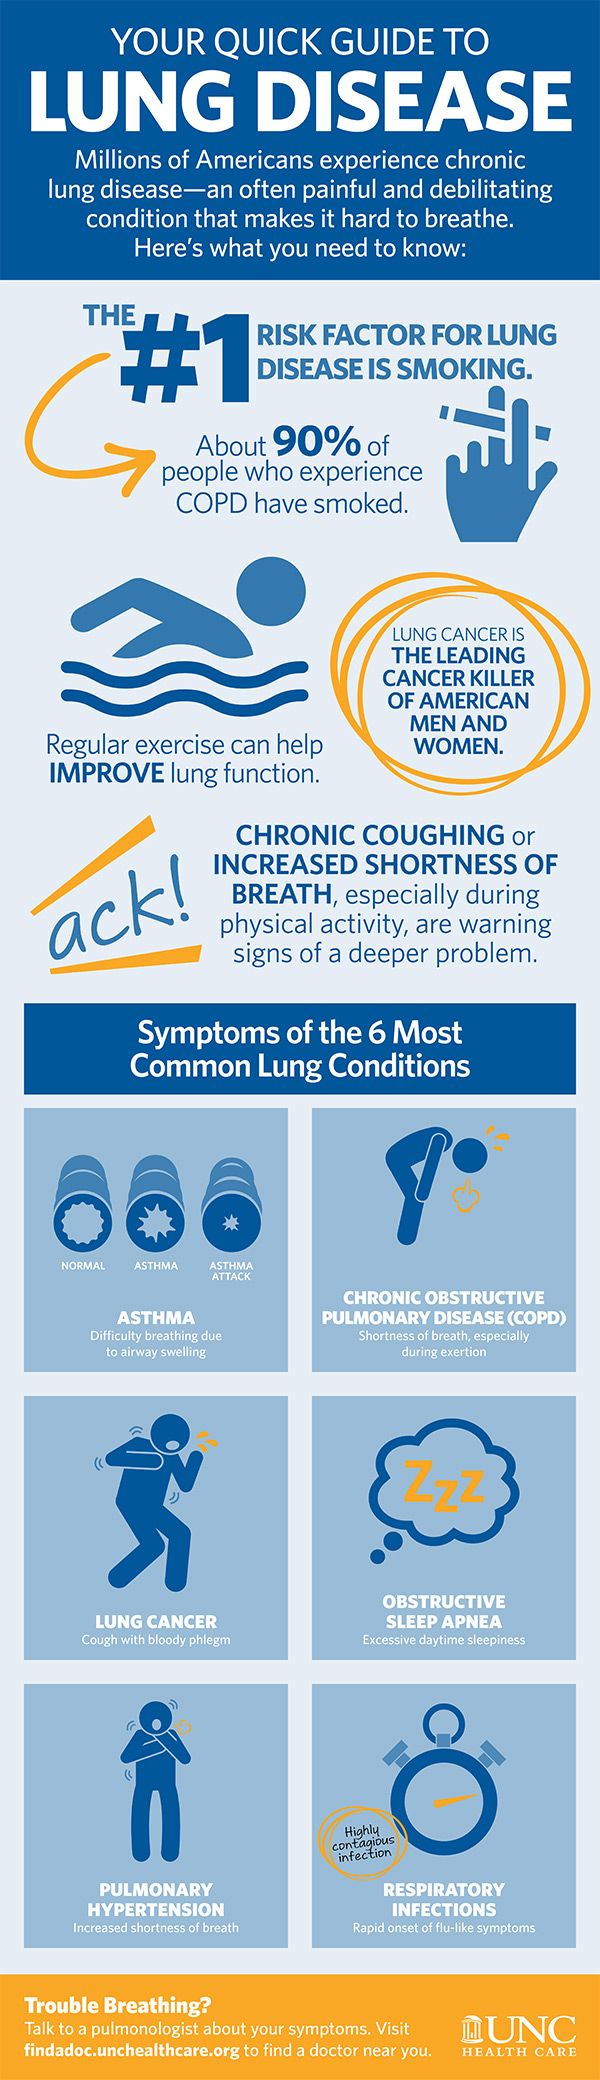 lung disease infographic